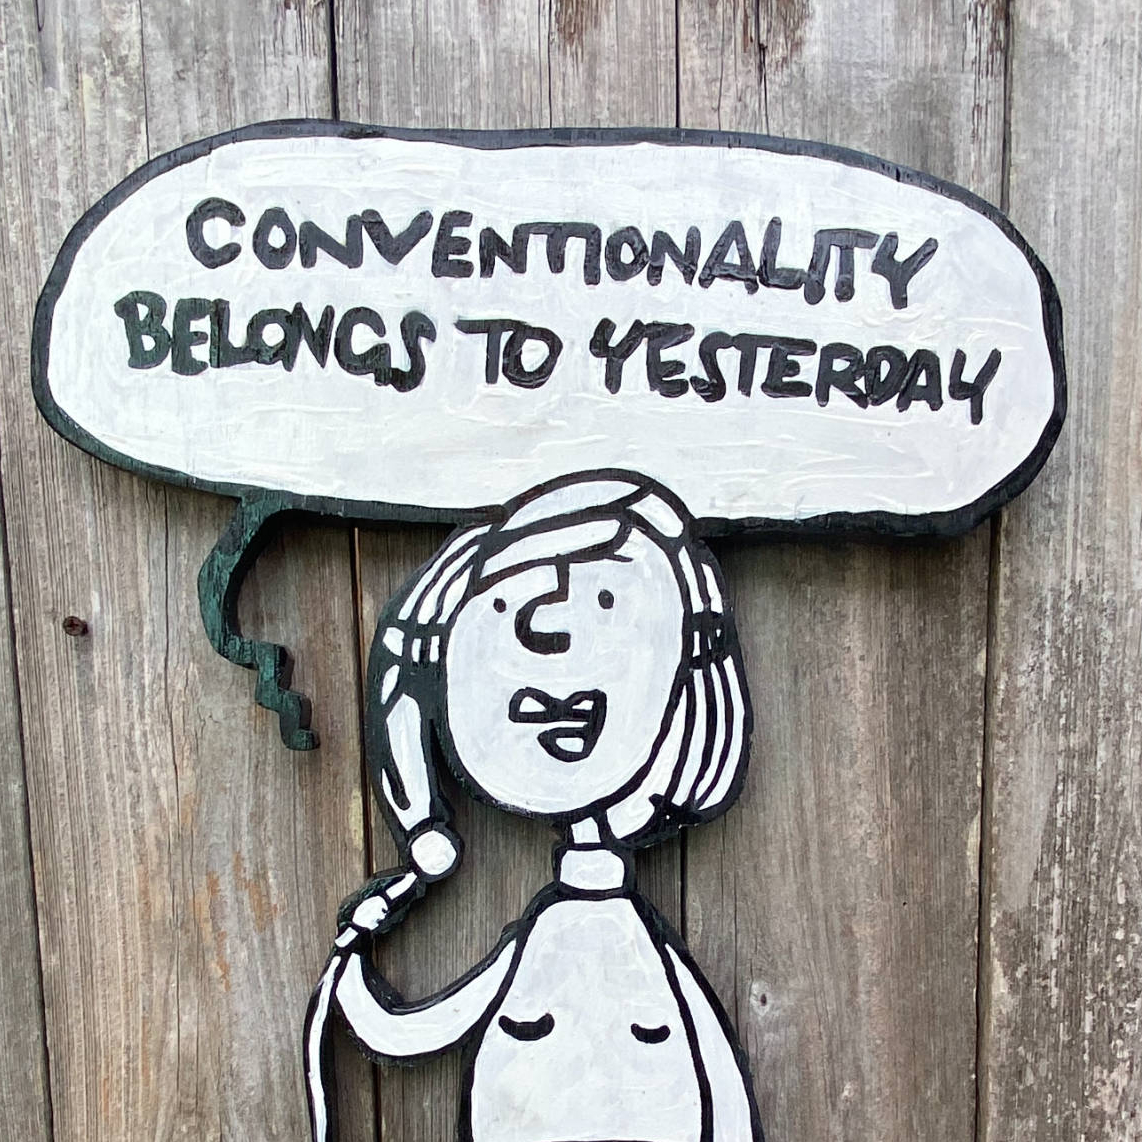 Conventionality Belongs To Yesterday painting by David Rhoden